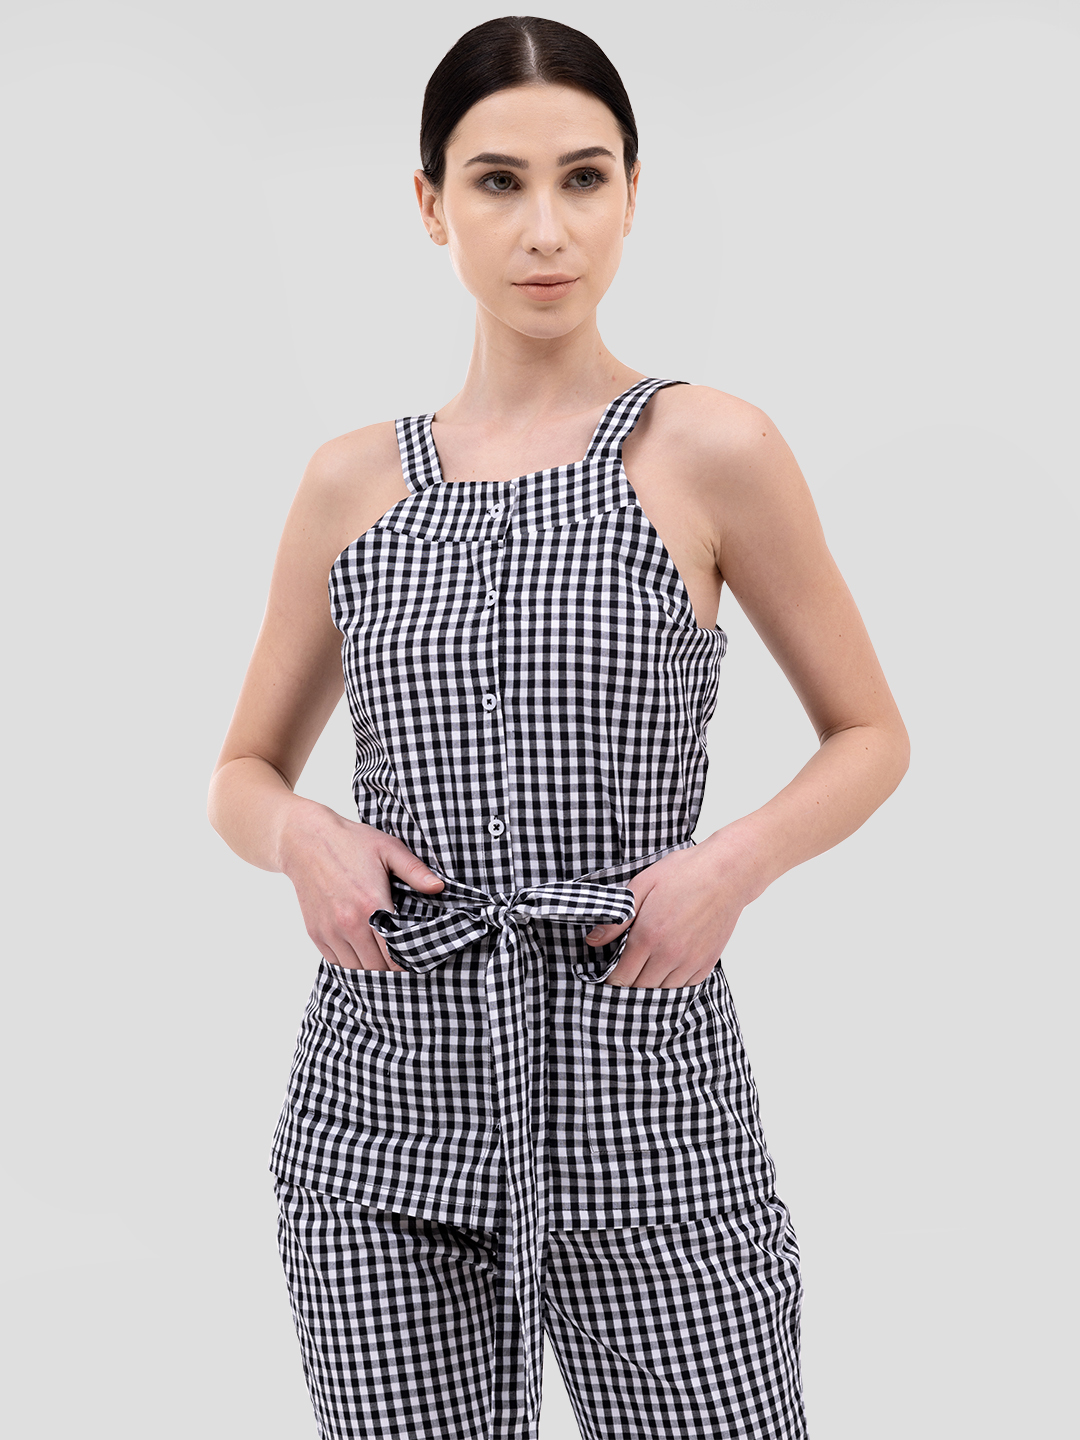 Strappy Black and White Gingham Tie Shirt - Front